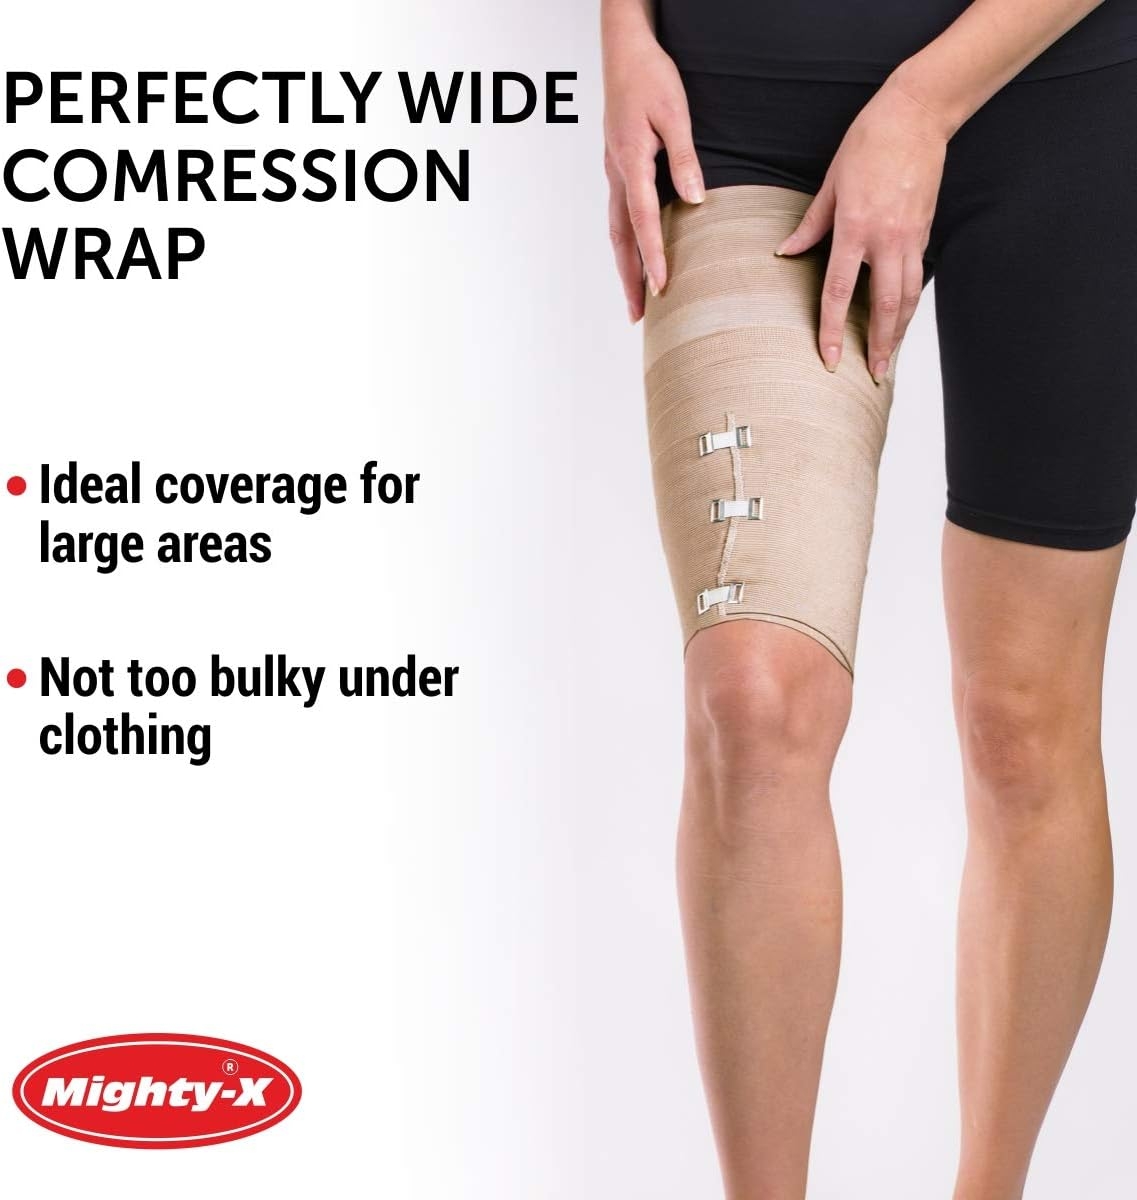 Premium Elastic Bandage Wrap - 2 Pack + 18 Extra Clips - Wide (6 inch) Compression Bandage - Stretches up to 15ft in Length